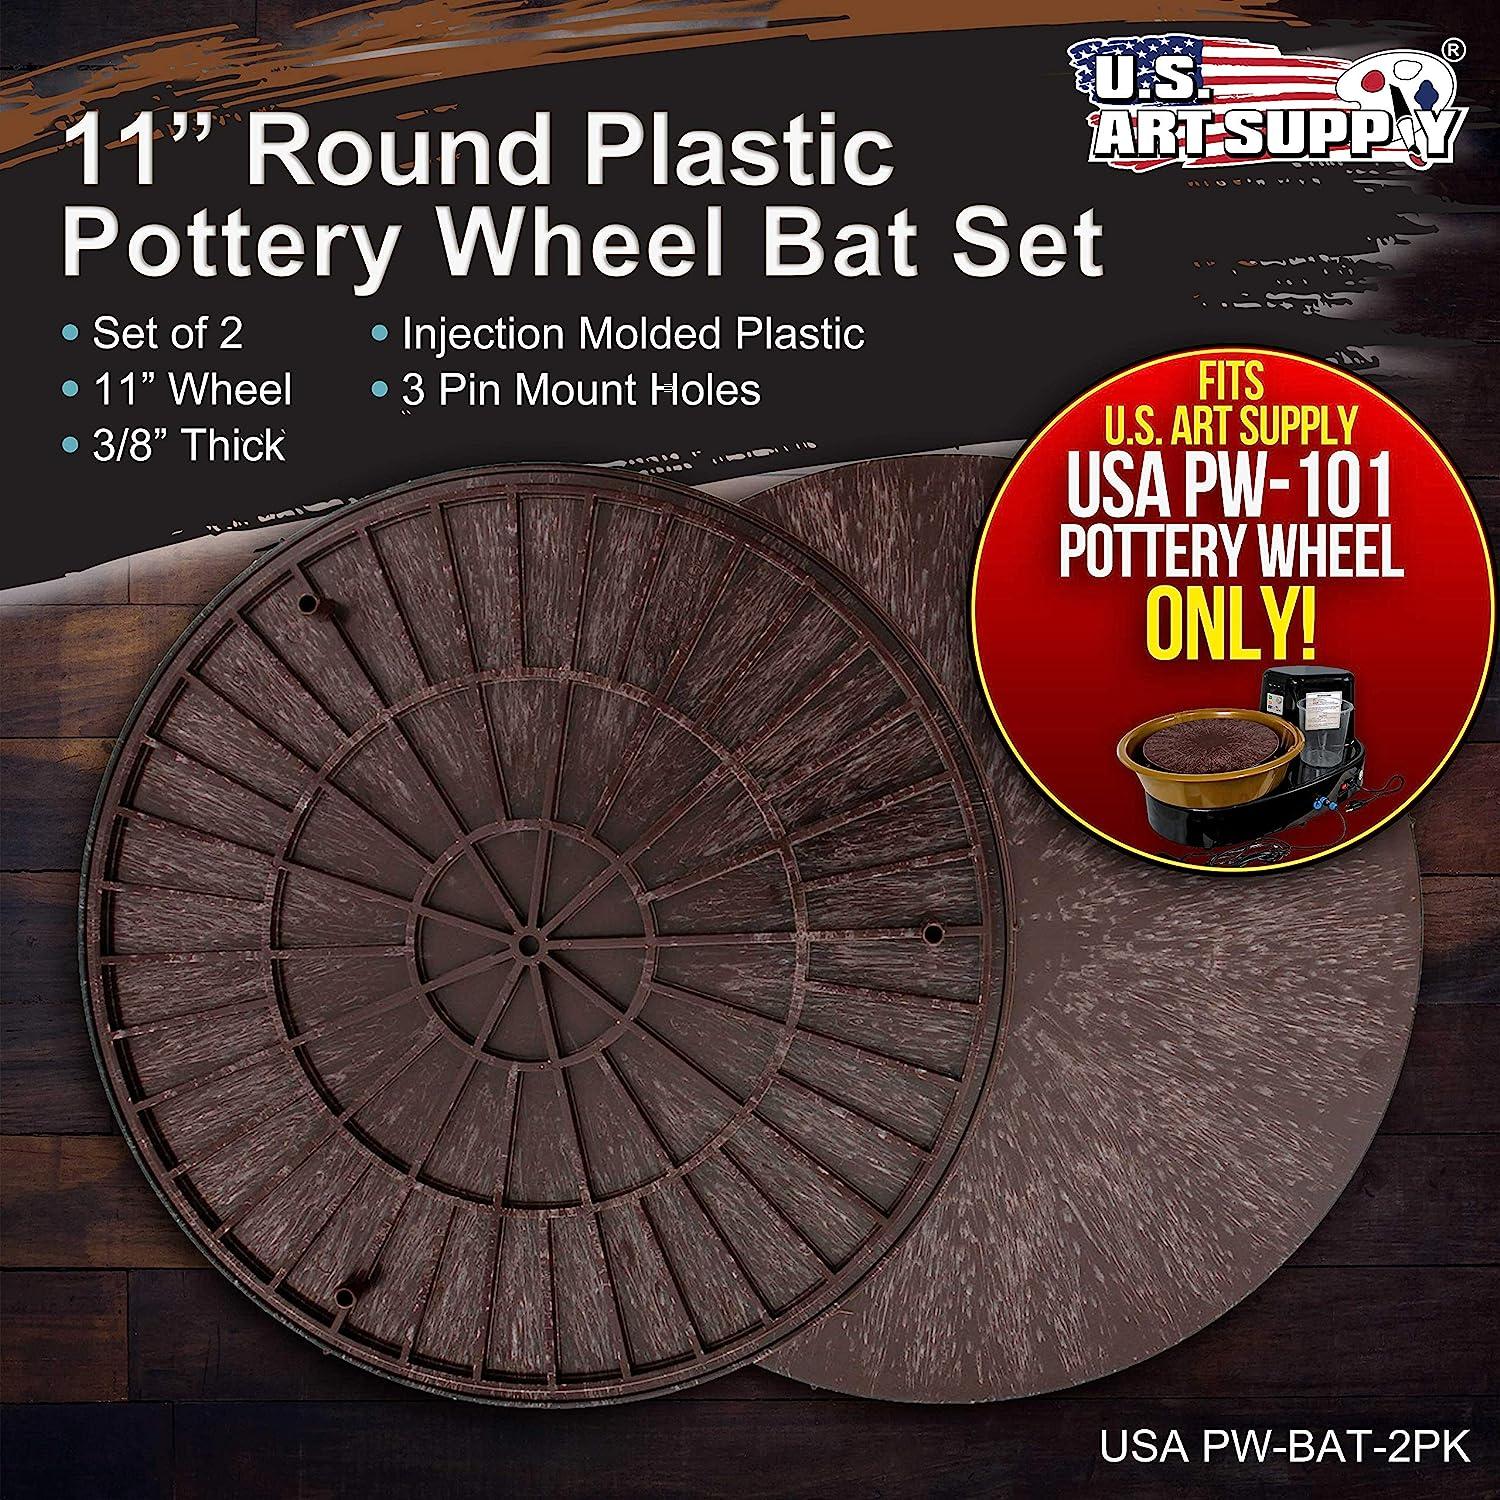 US Art Supply - 11 Round Plastic Pottery Wheel Bats, Set of 2 - Durable,  Balanced Bat for Use Spinning Clay & Making Ceramics - Design to Only Fit  US